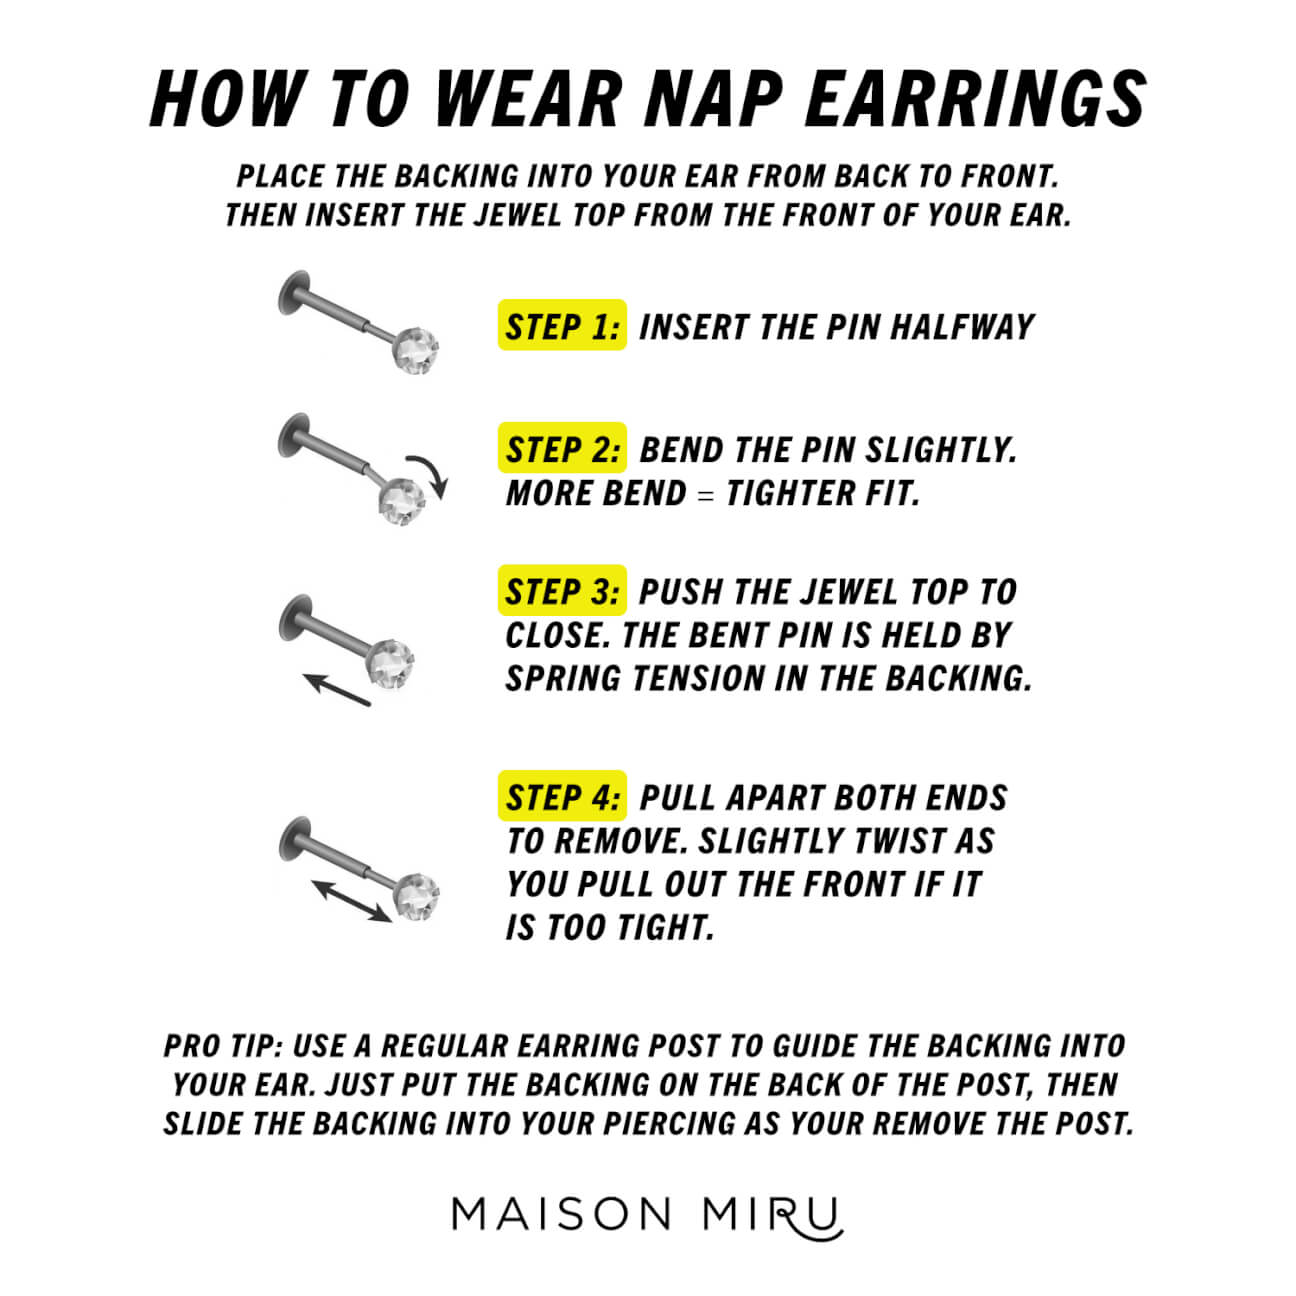 How to Wear the Tiny Crystal Nap Earrings